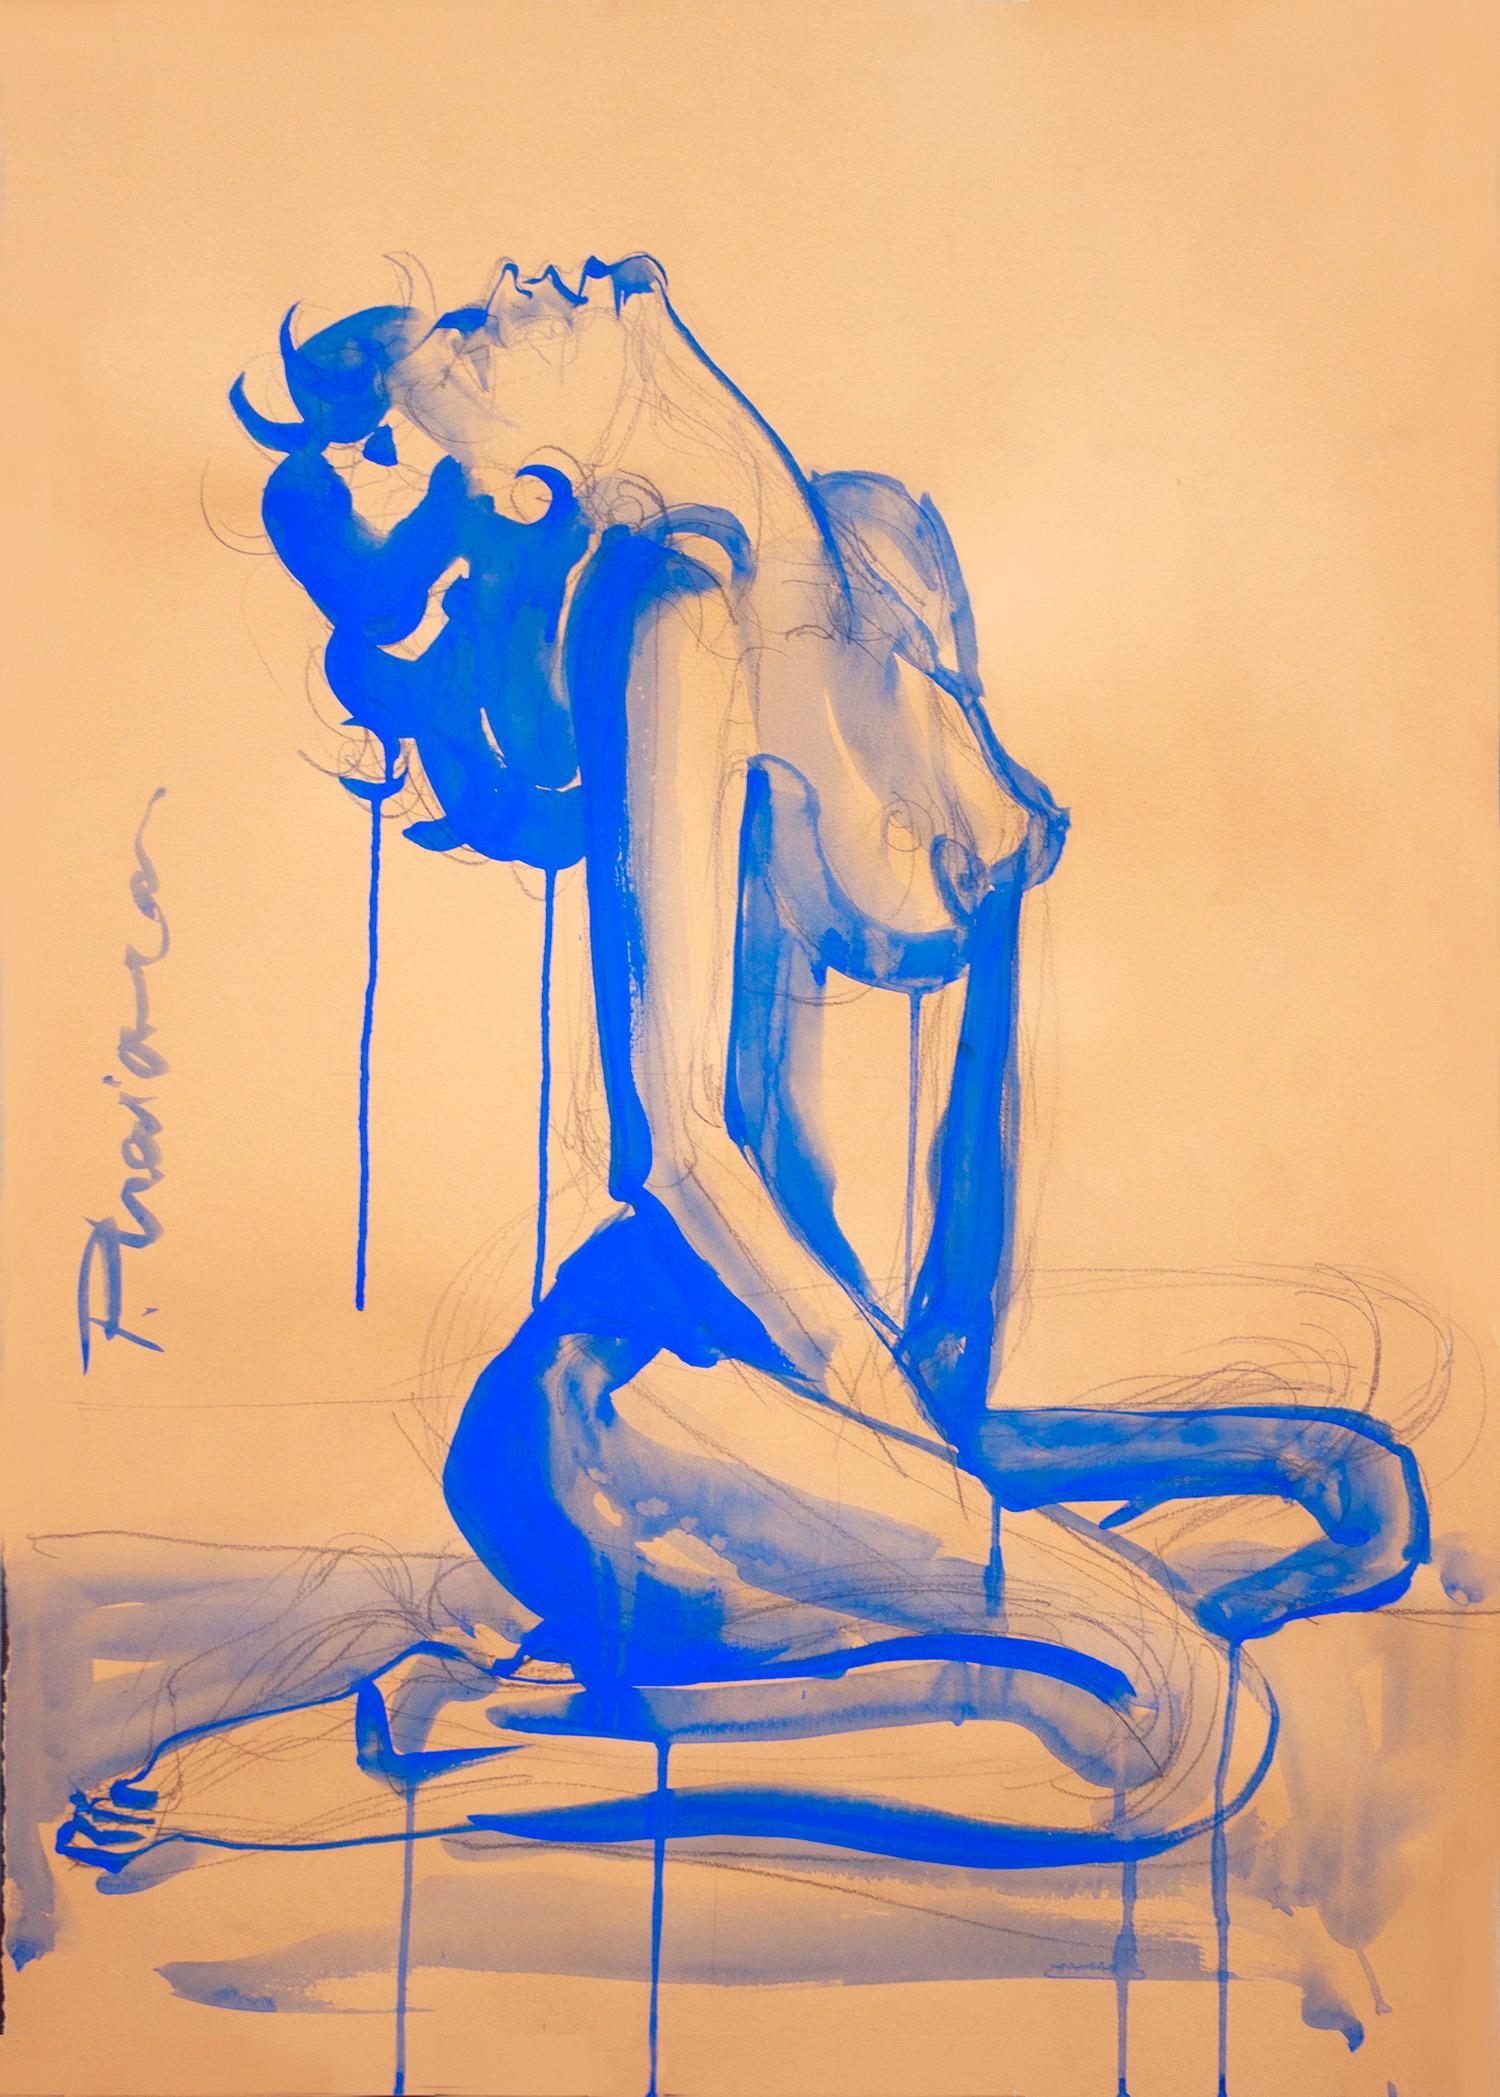 Part of my Nude series, inspired by Matisse. Ultramarine tempera on paper.
Shipped rolled in a tube, directly from the artist's studio. Shipping anywhere in the world, flat rate. Registered airmail.

Artist Statement
"I started by painting